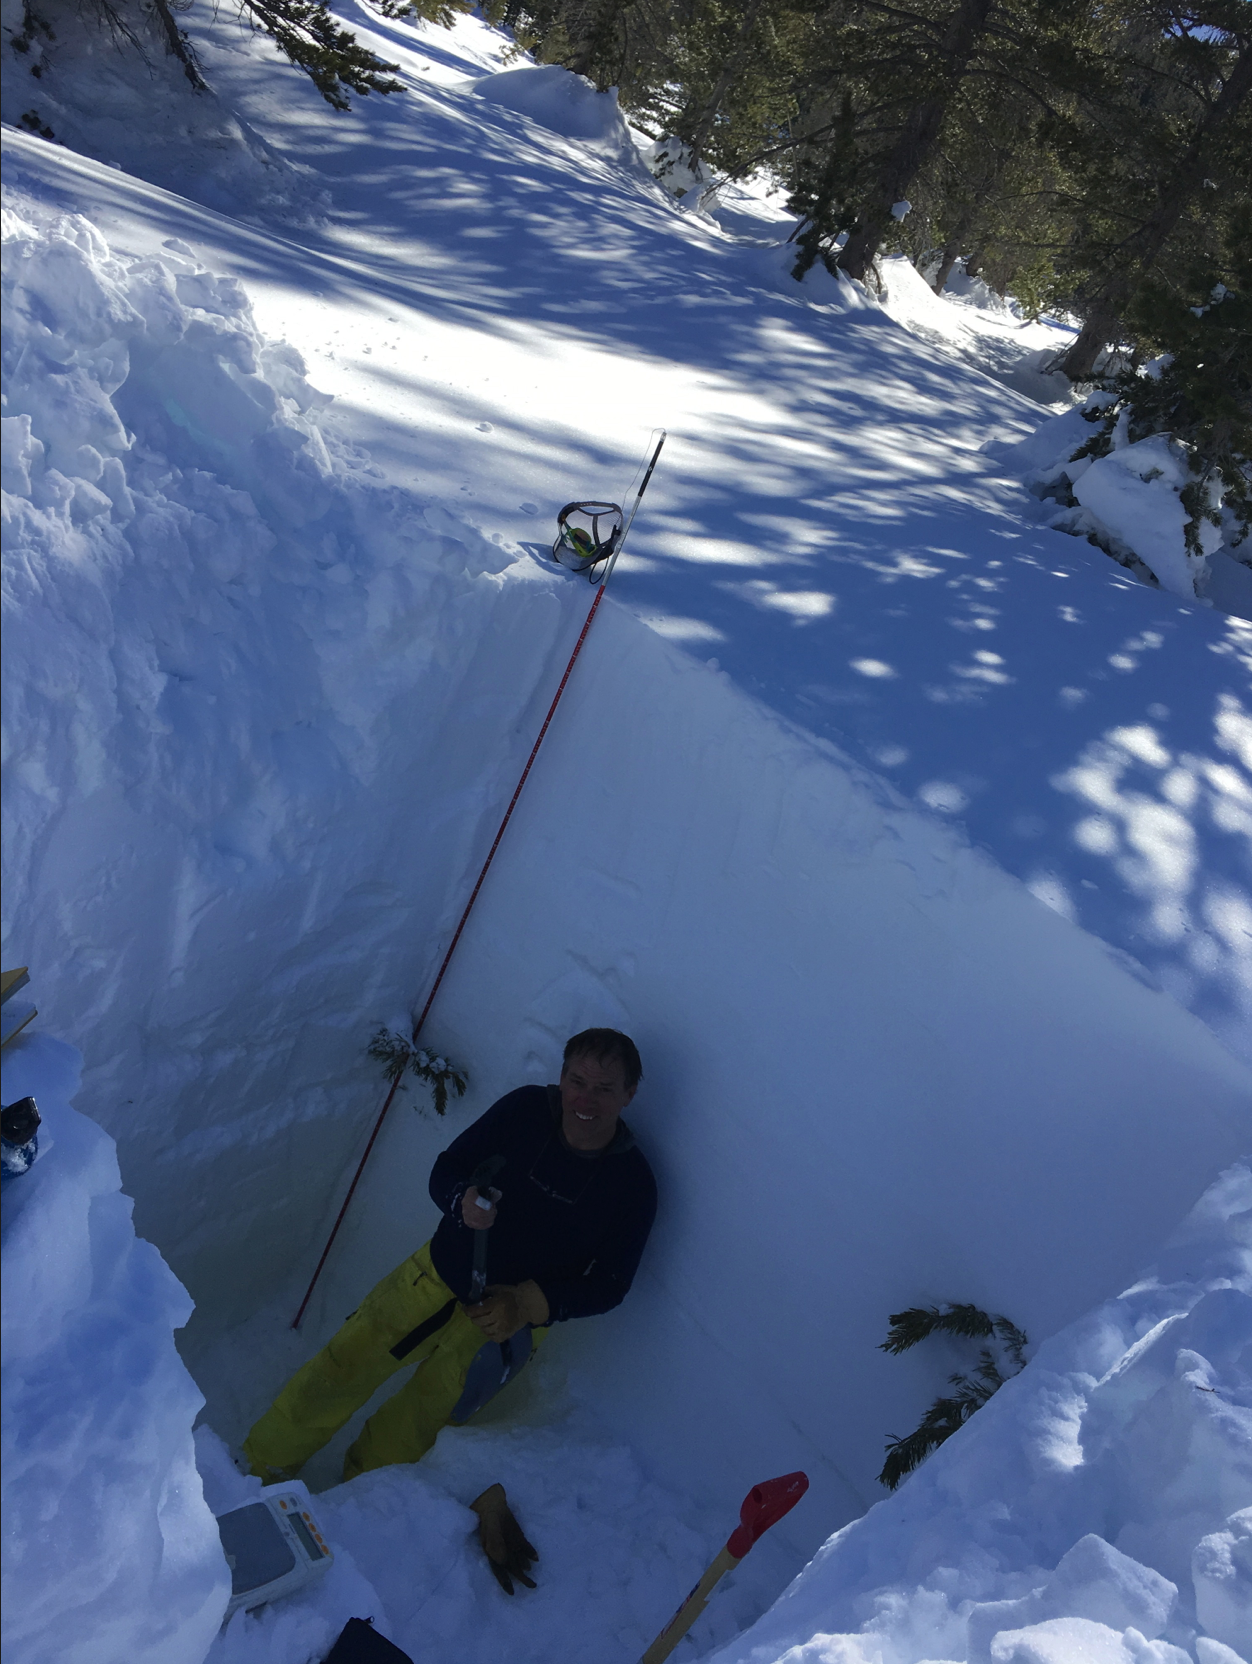 Snow hydrologist Tom Painter takes a break after digging out a snow pit, to measure density and other parameters.